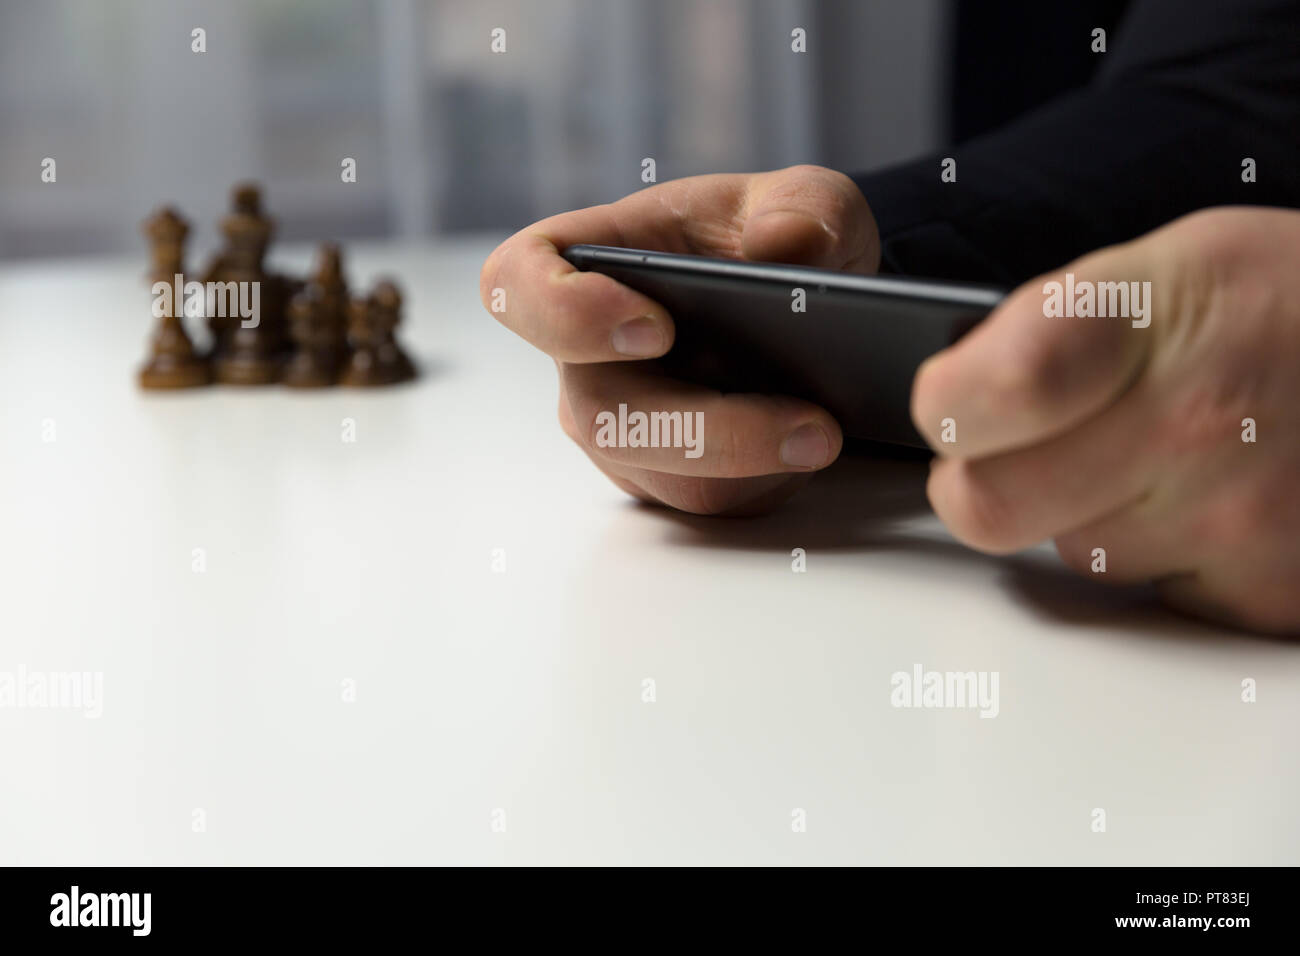 Businessman with phone planning strategy with chess figures on table. Strategy, leadership and teamwork concept. Stock Photo